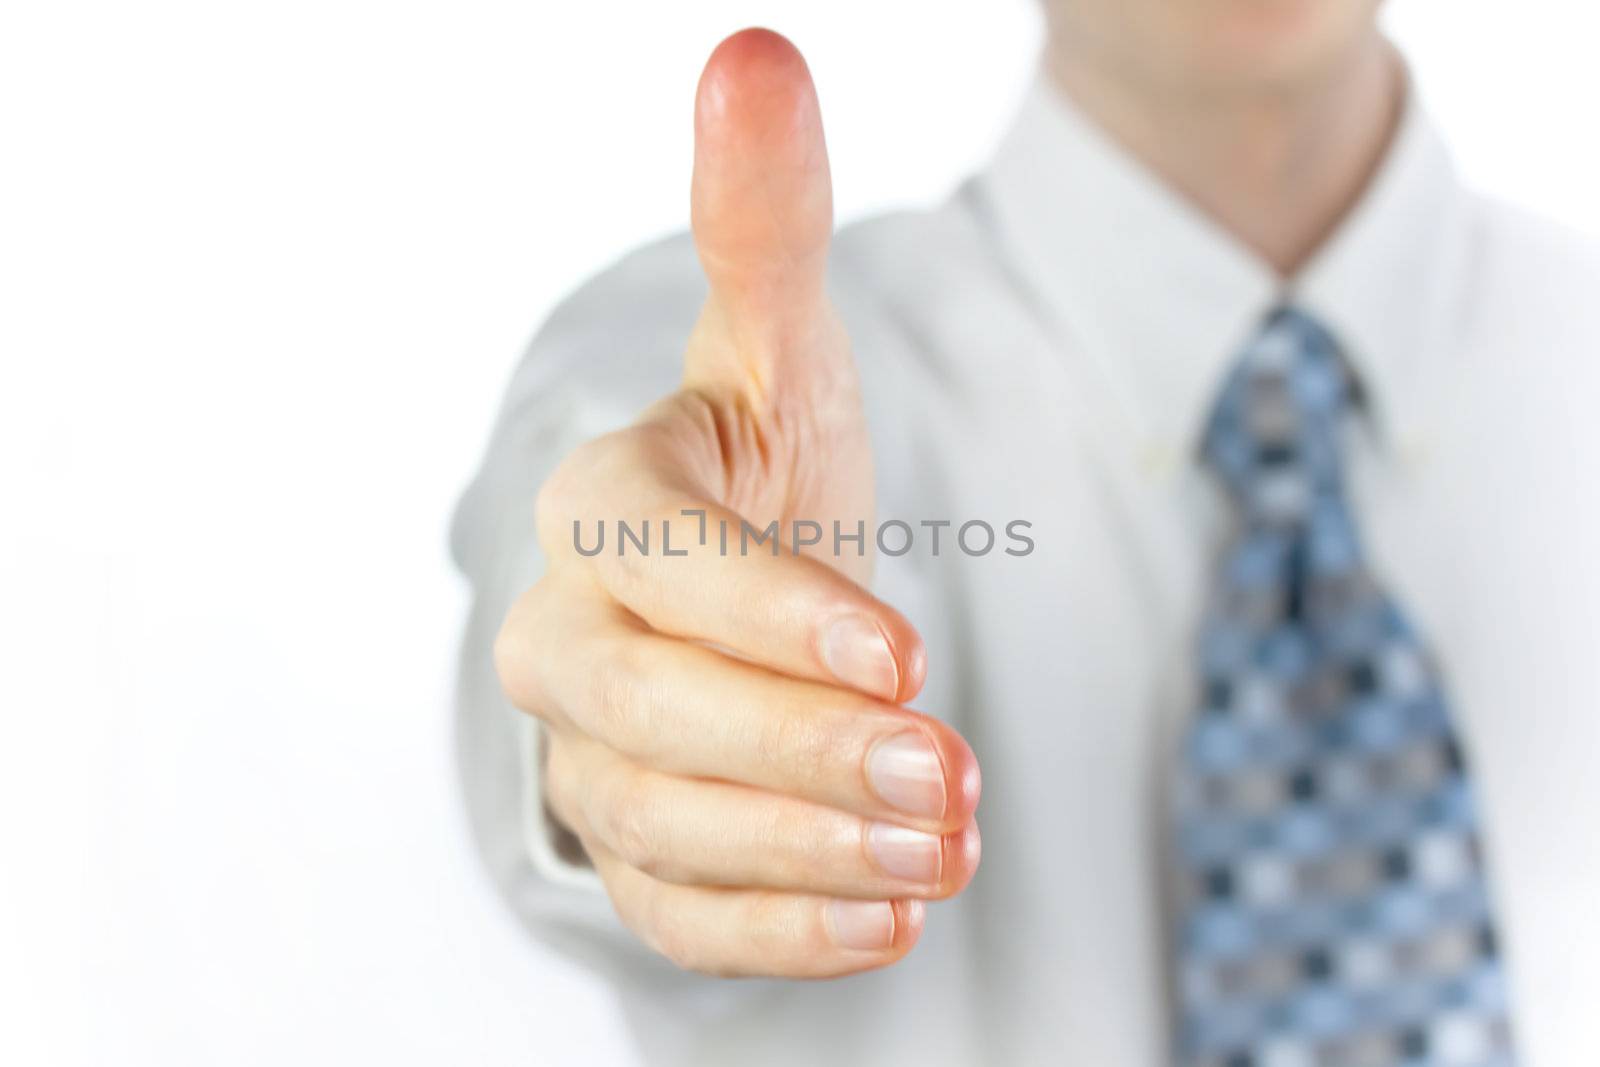 Business man extending hand to shake over white background